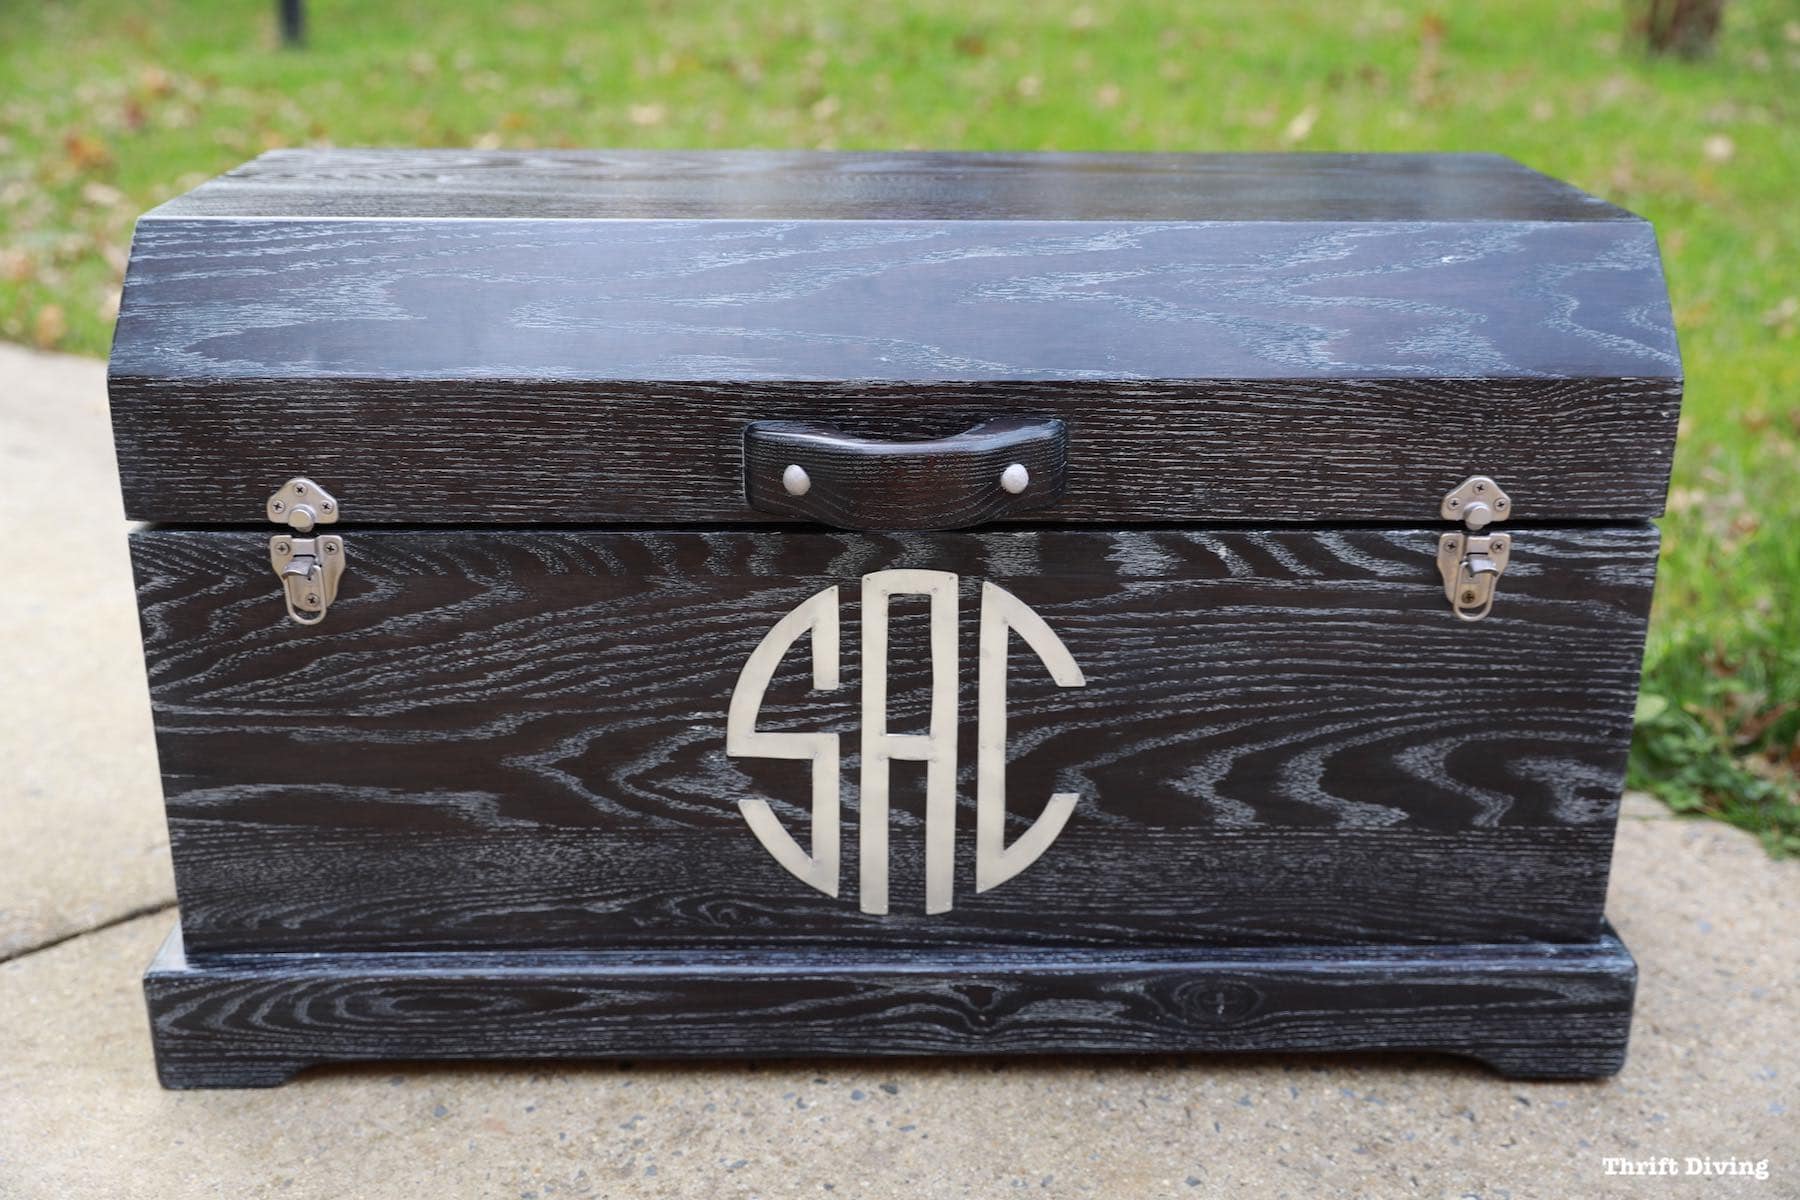 Using liming wax on an oak wood chest - AFTER with metal monogramed letters - Thrift Diving